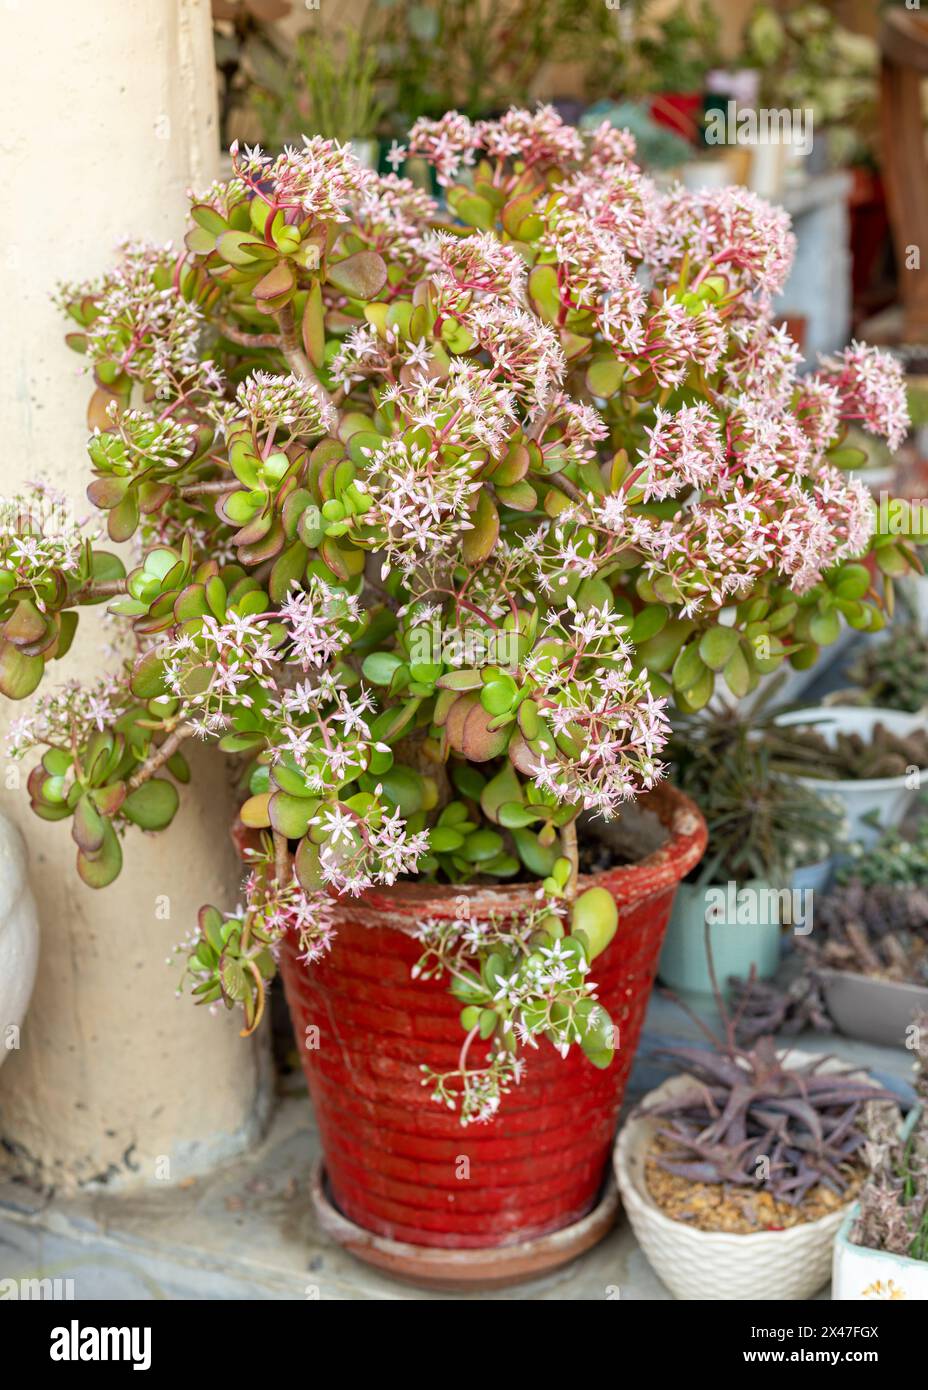 Crassula ovata blooming succulent plant in garden in red pot Stock Photo